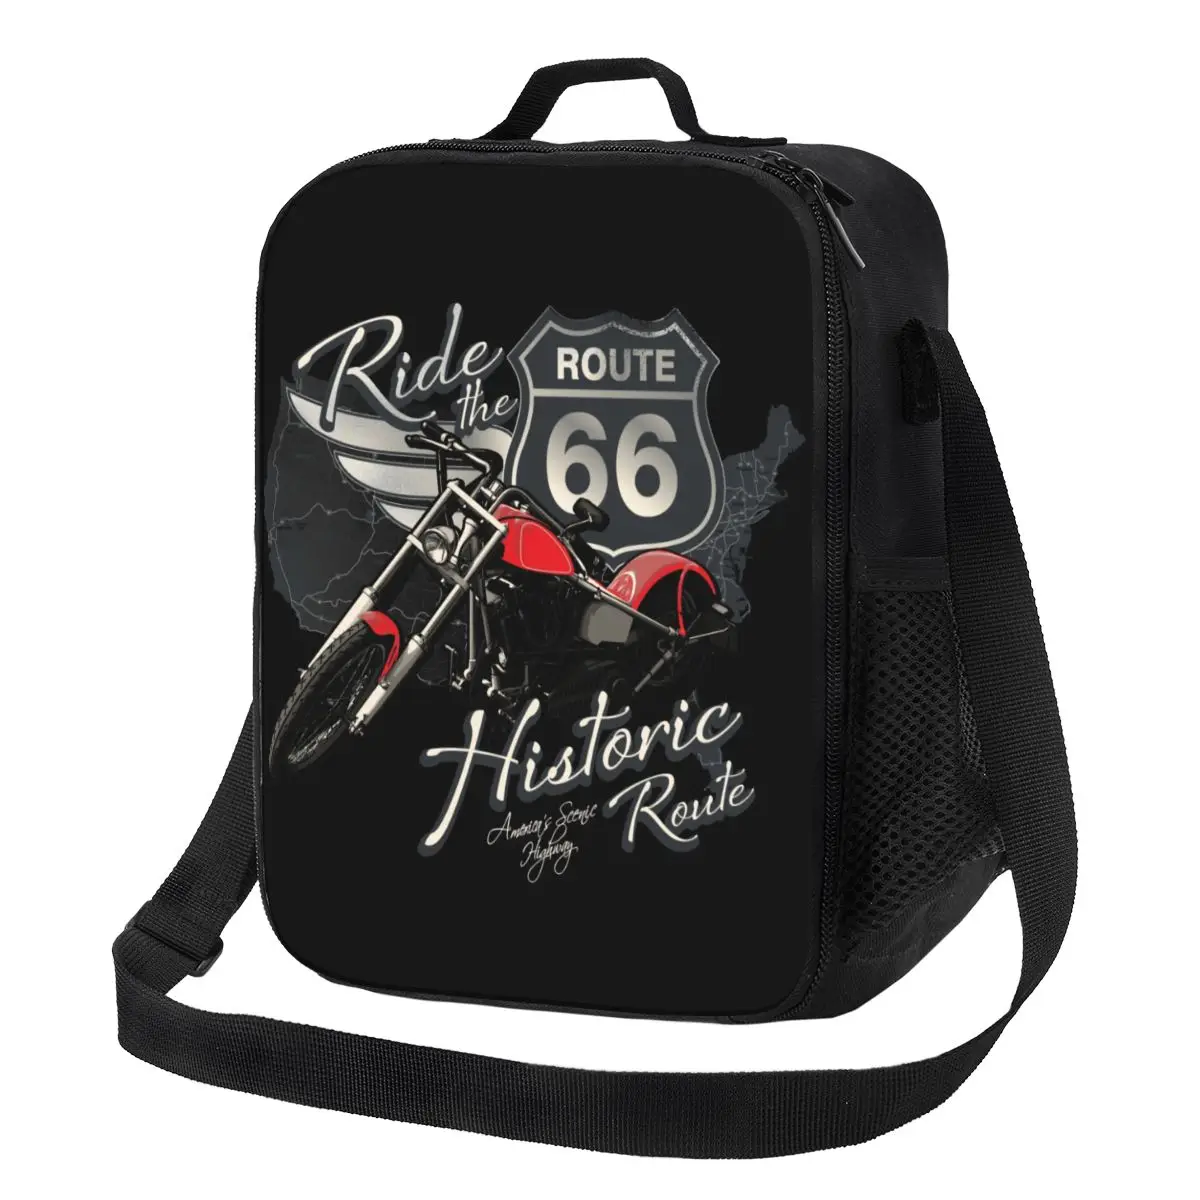 

Travel Motorcycle Ride The Historic Route 66 Thermal Insulated Lunch Bag USA America Highway Portable Lunch Tote Bento Food Box